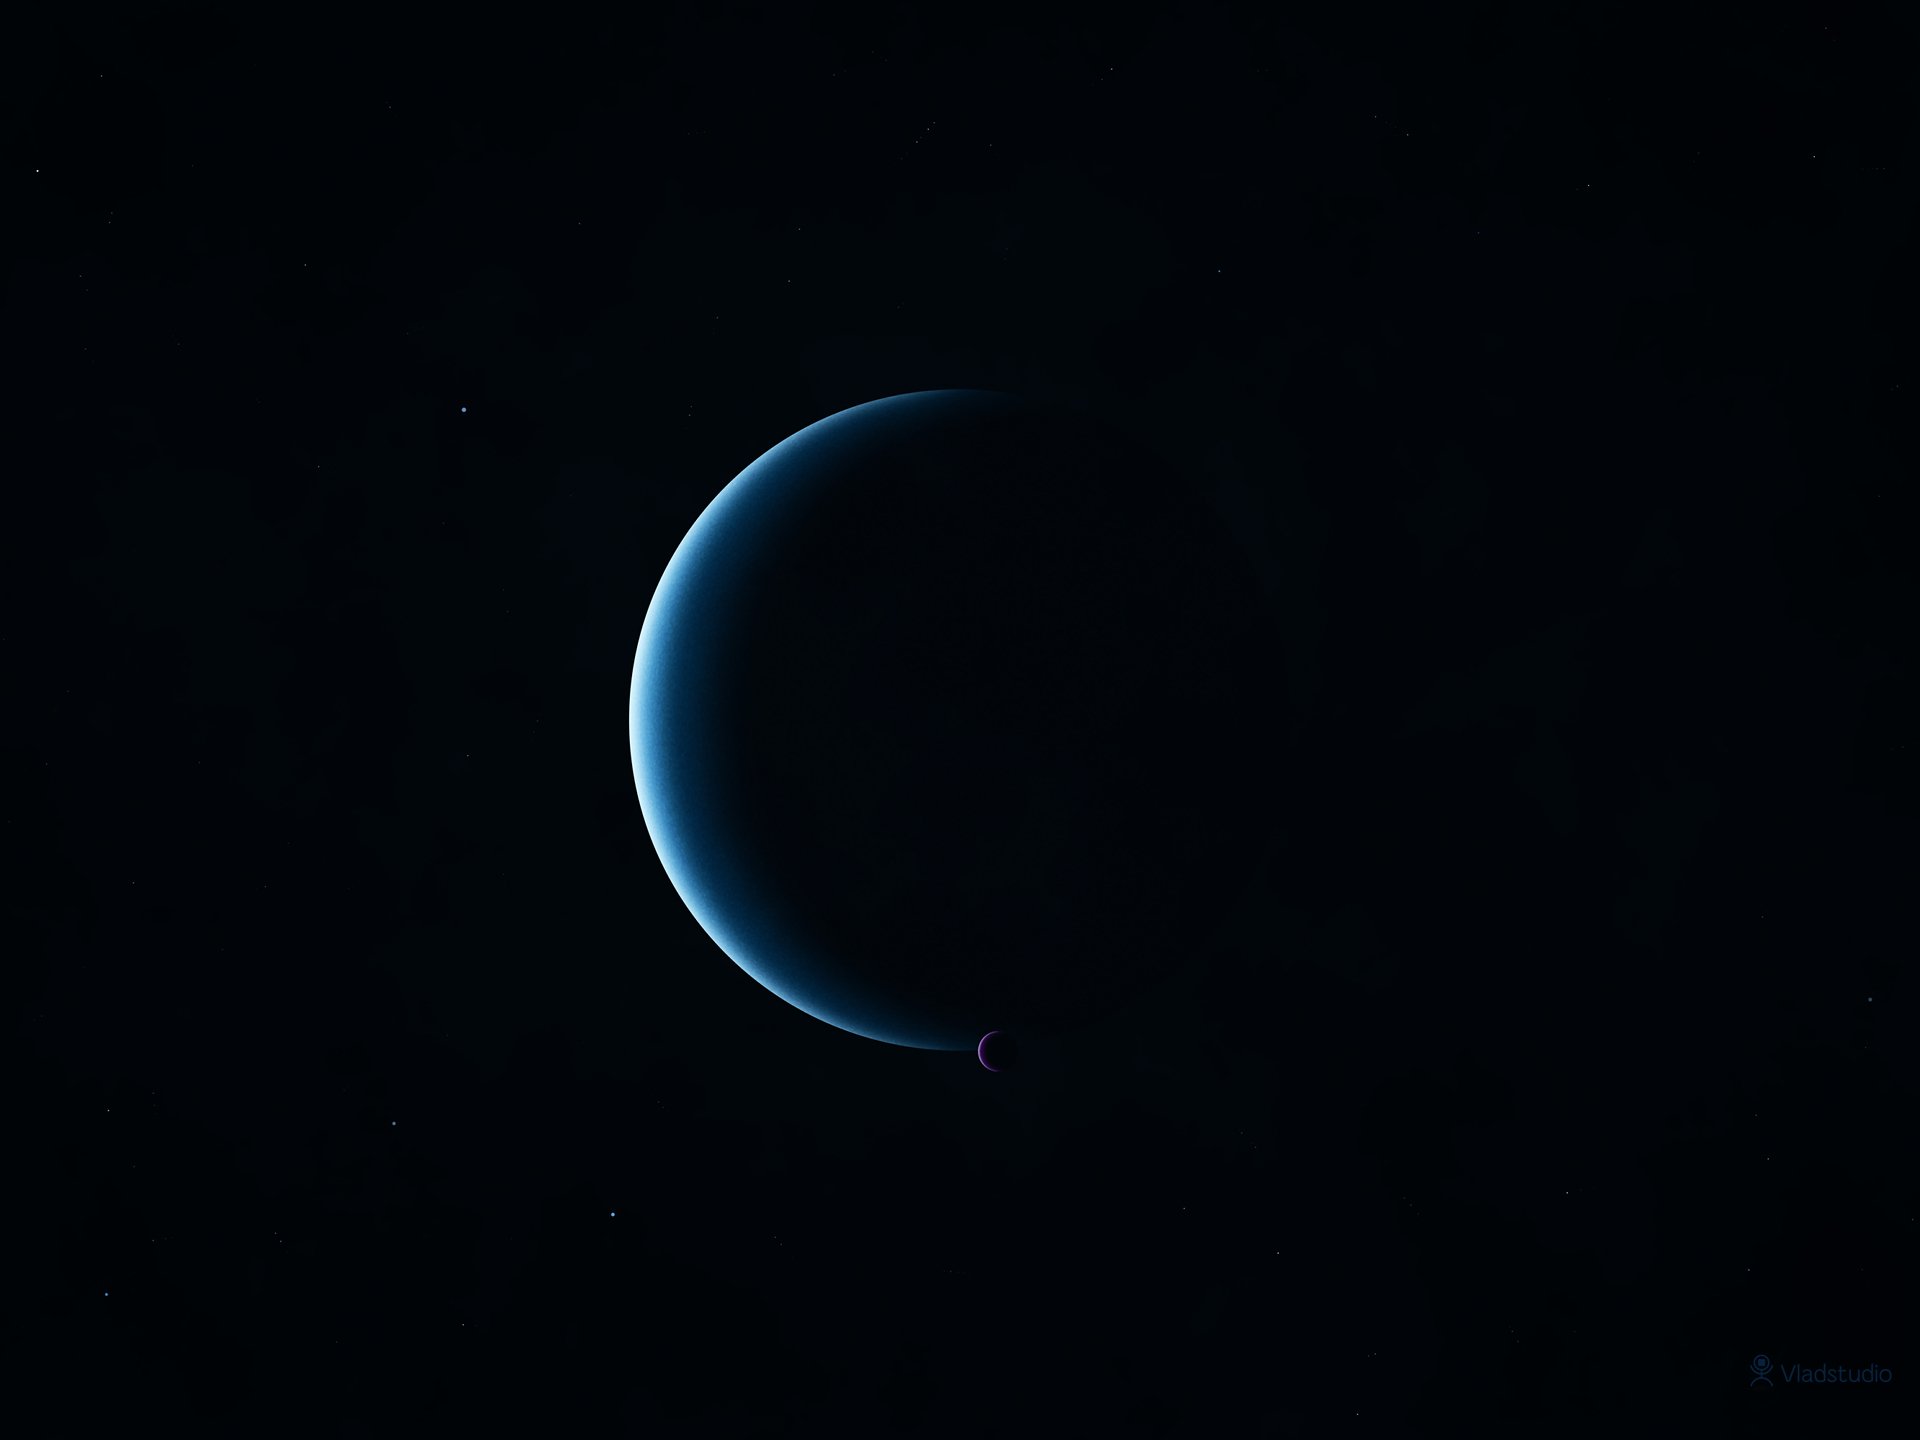 This cold planet makes a cool wallpaper